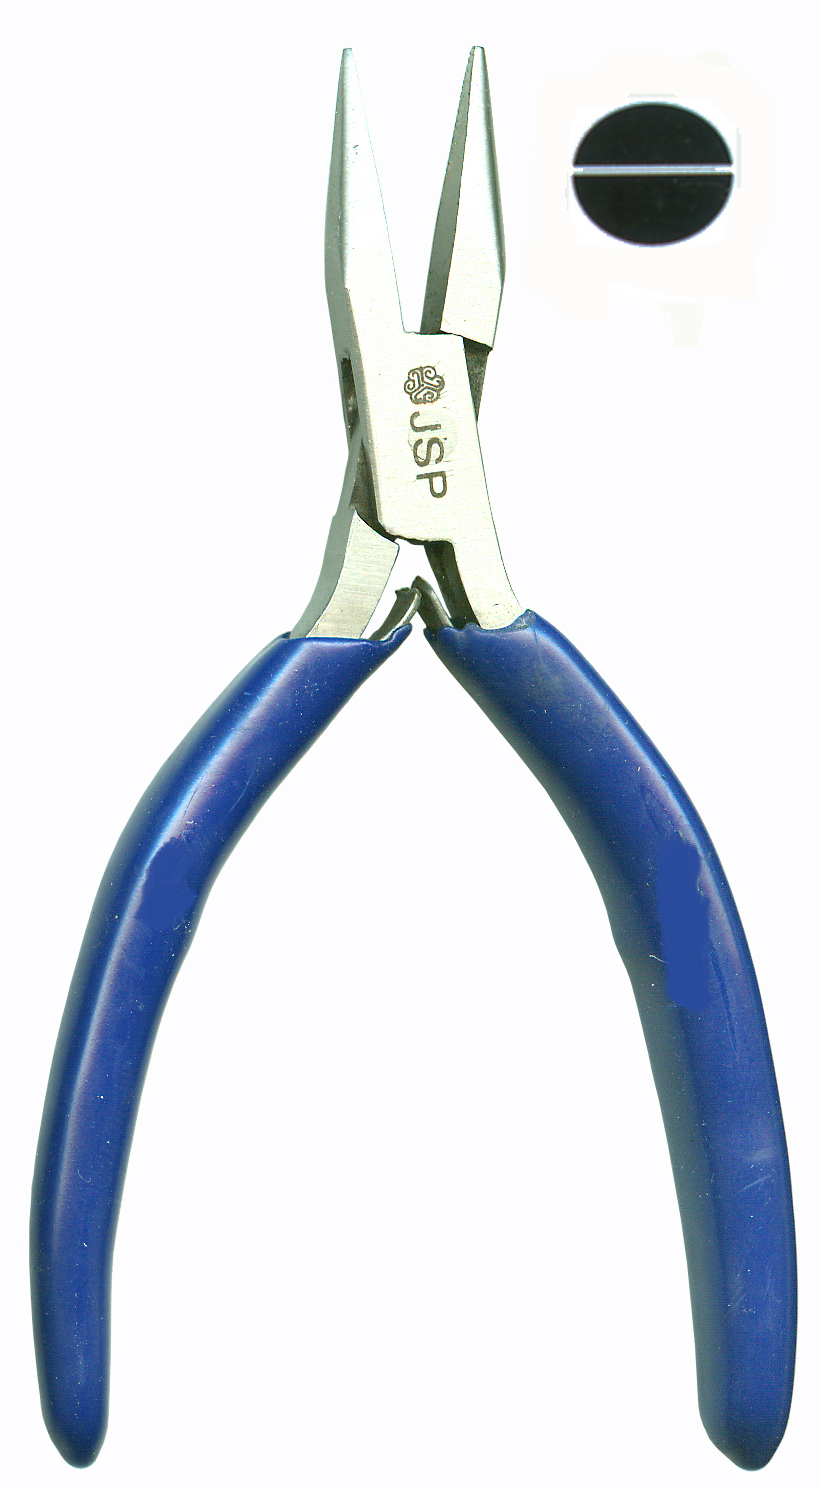 ECONOLINE BOX JOINT PLIER. CHAIN NOSE ECONO PLIER with GRIP - Click Image to Close